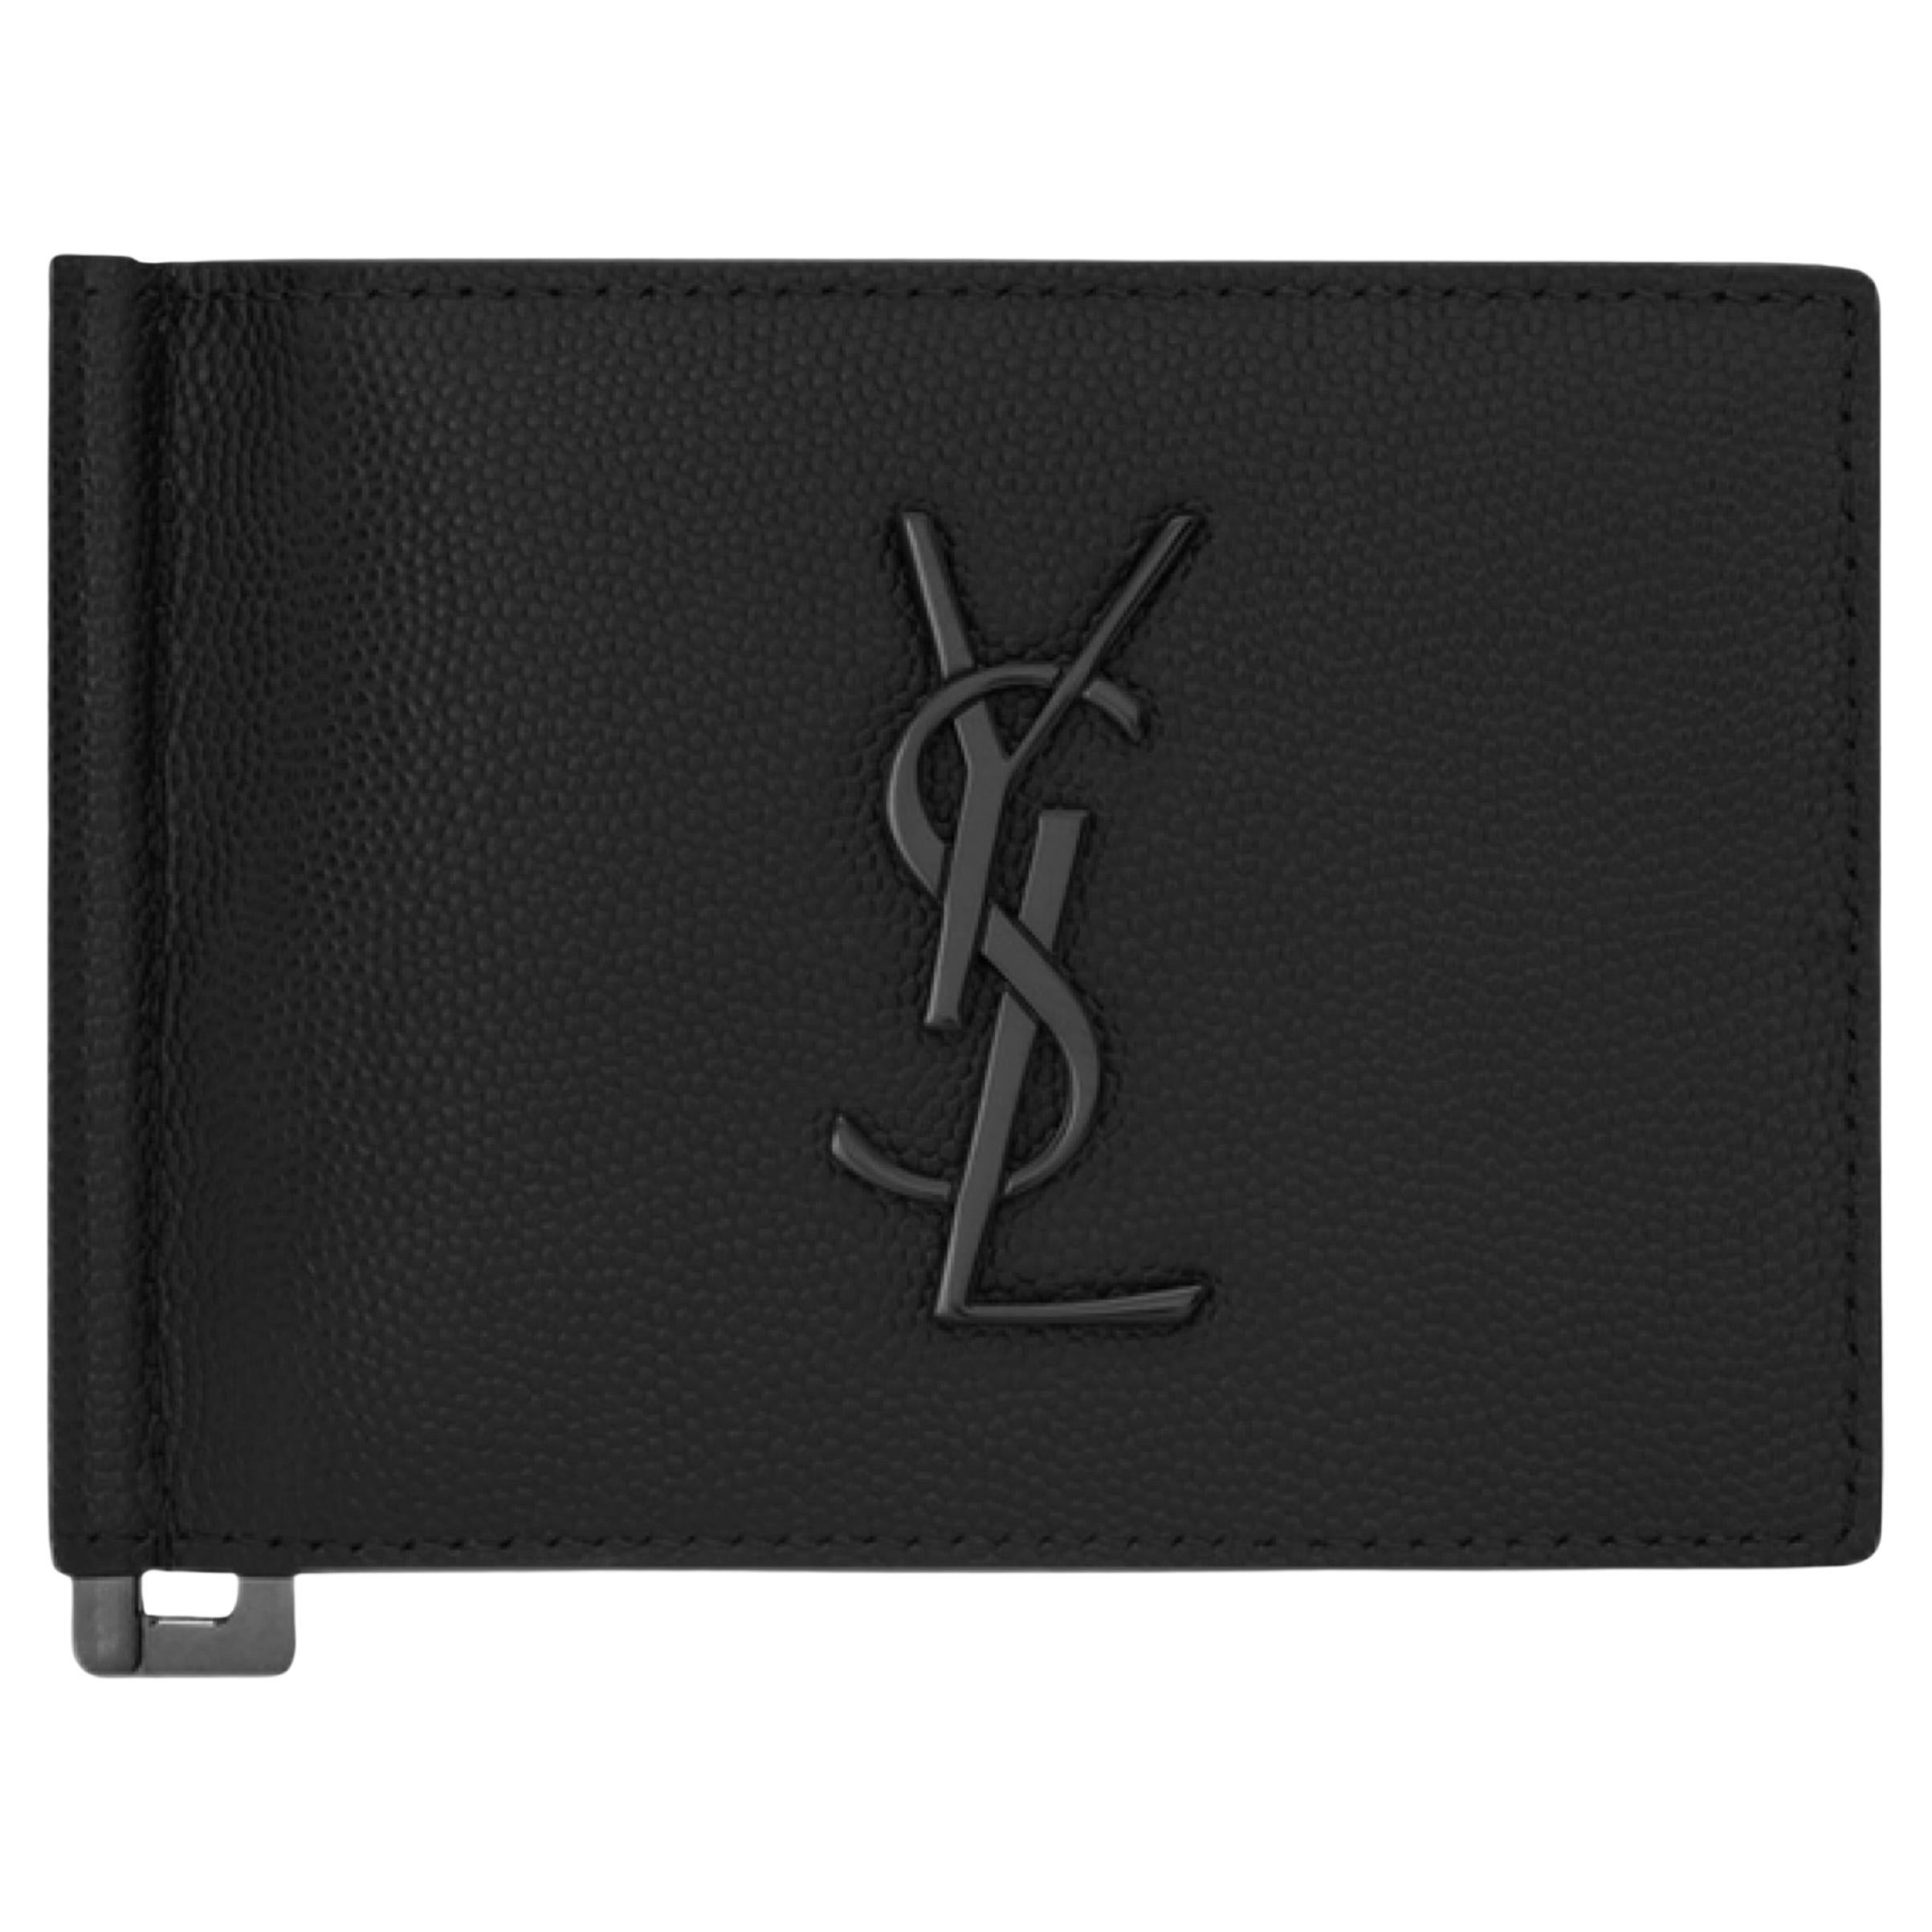 Louis Vuitton Bill Clip - For Sale on 1stDibs